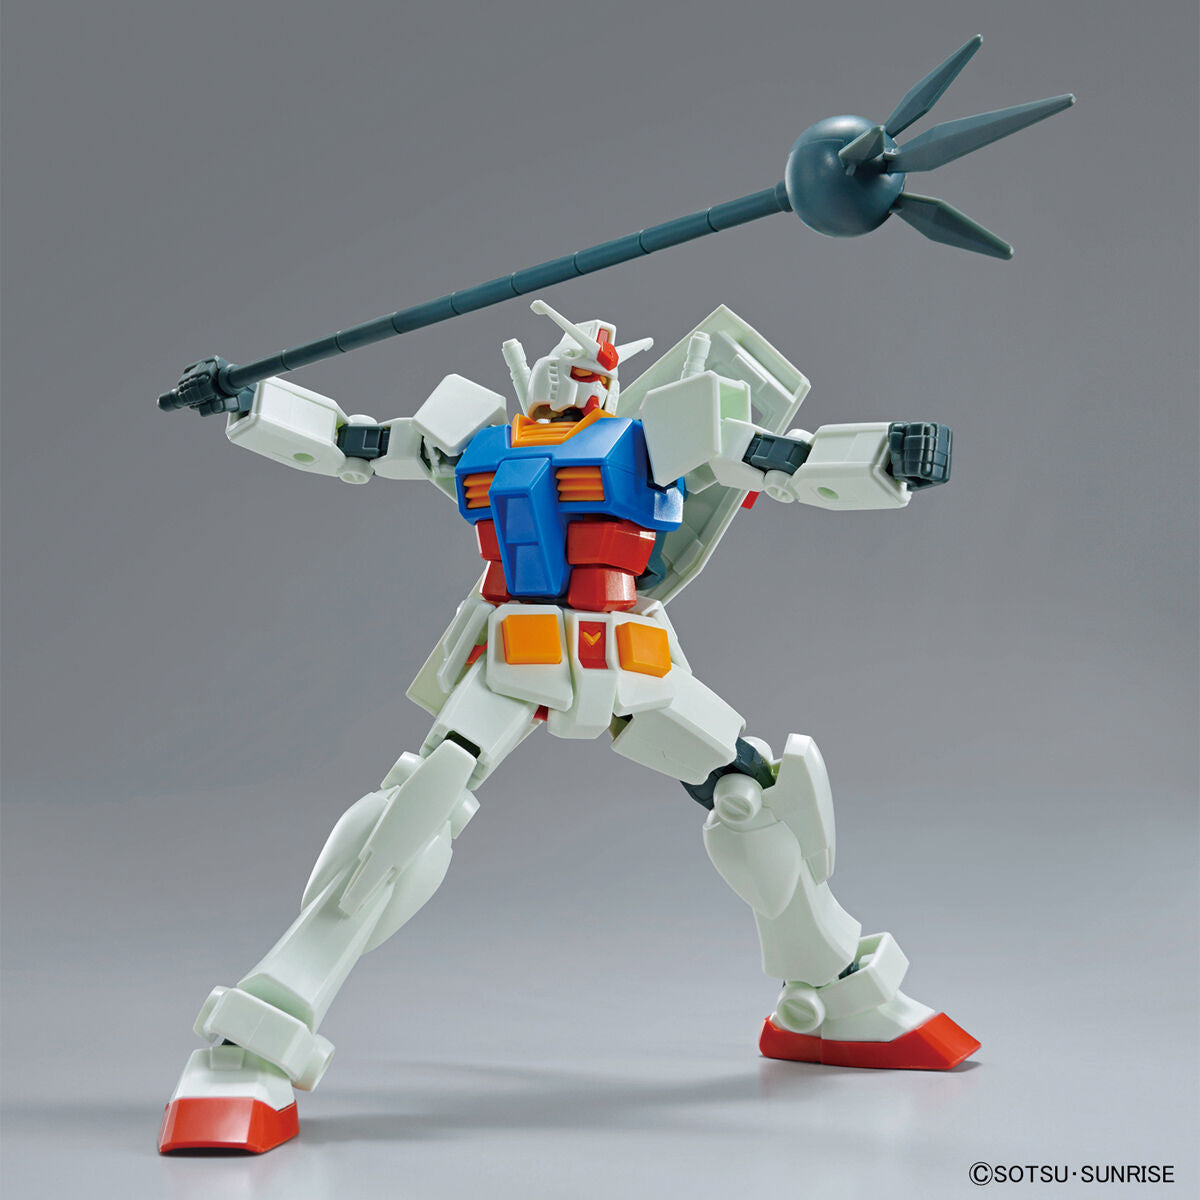 RG 1/144 God Gundam - Release Info, Box art and Official Images